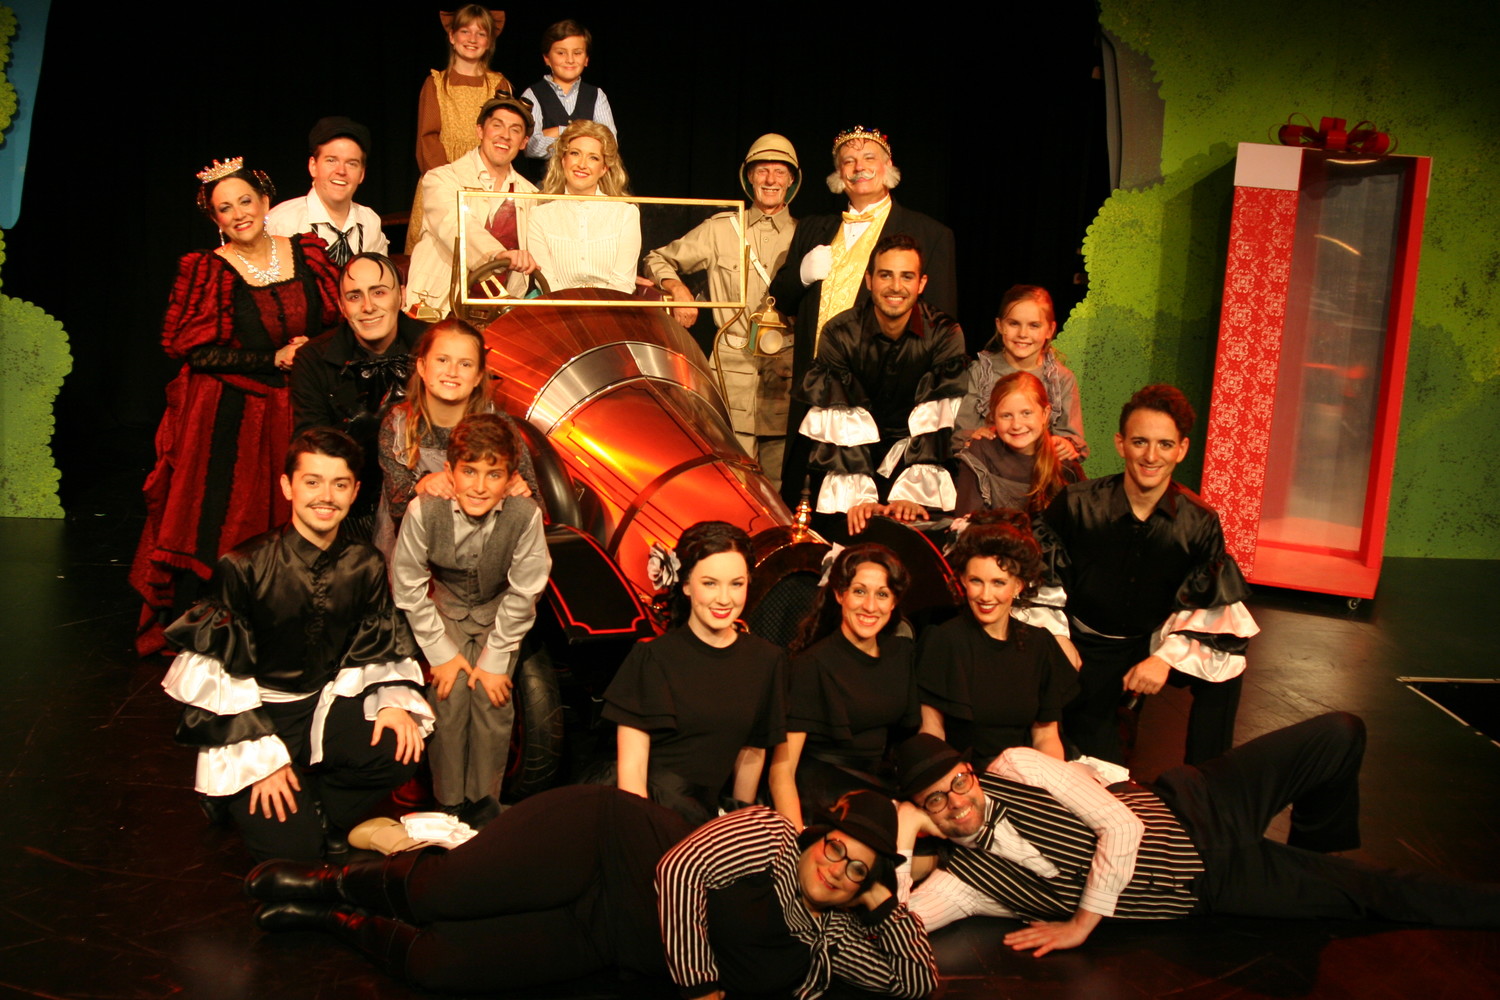 “Chitty Chitty Bang Bang” is running at the Alhambra Theatre & Dining through July 29.